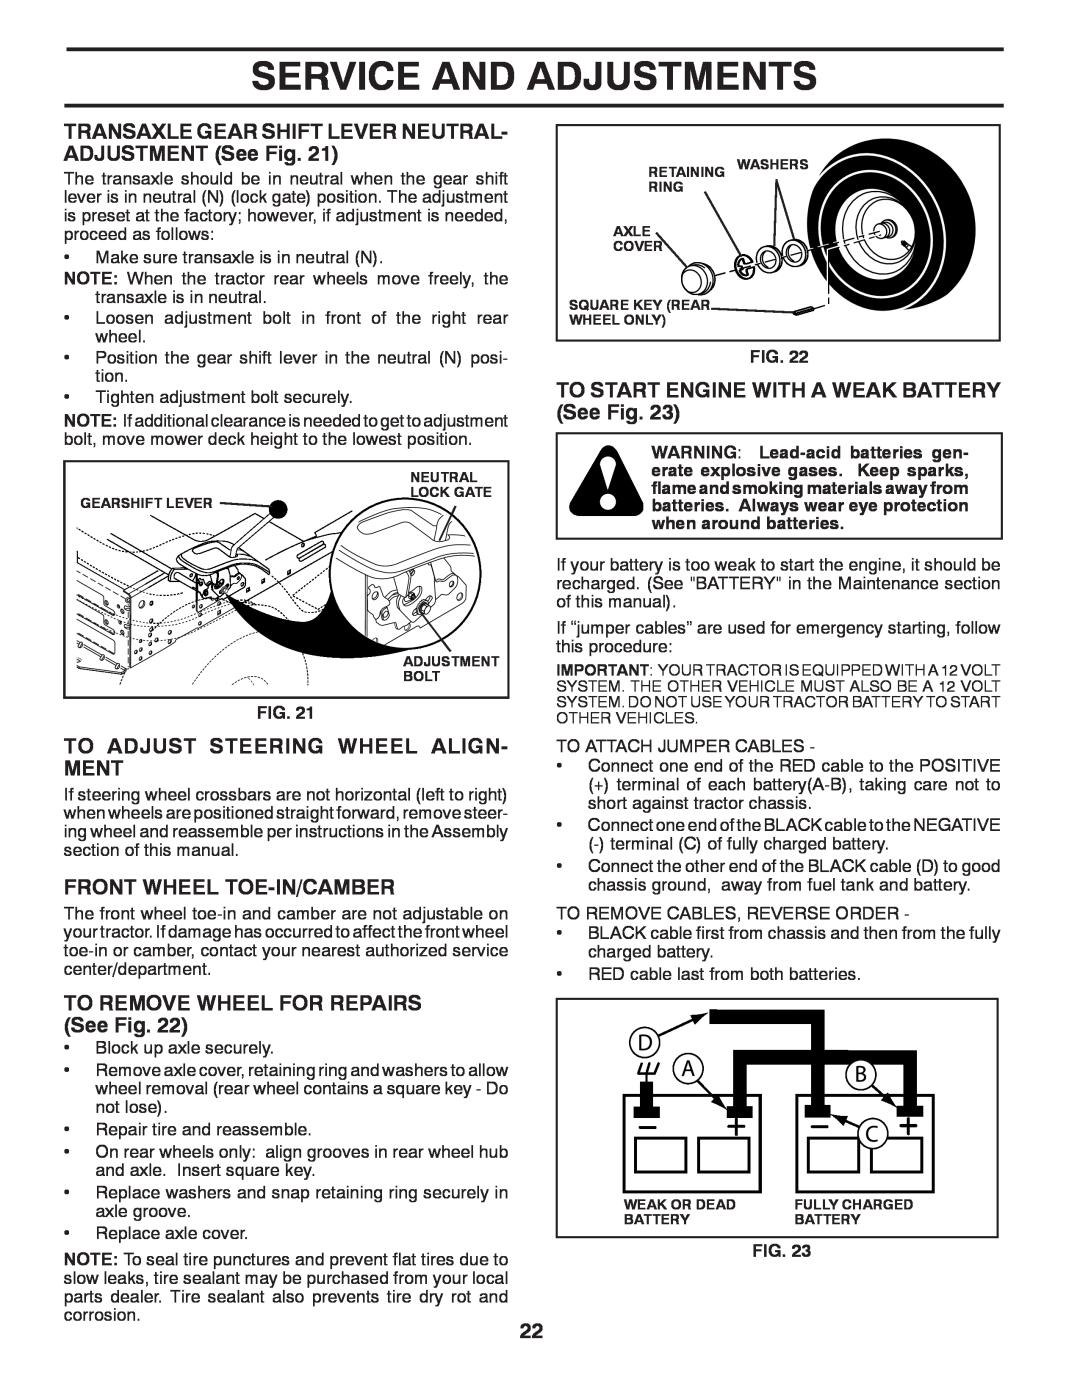 Poulan 960120068 manual TO START ENGINE WITH A WEAK BATTERY See Fig, To Adjust Steering Wheel Align- Ment 